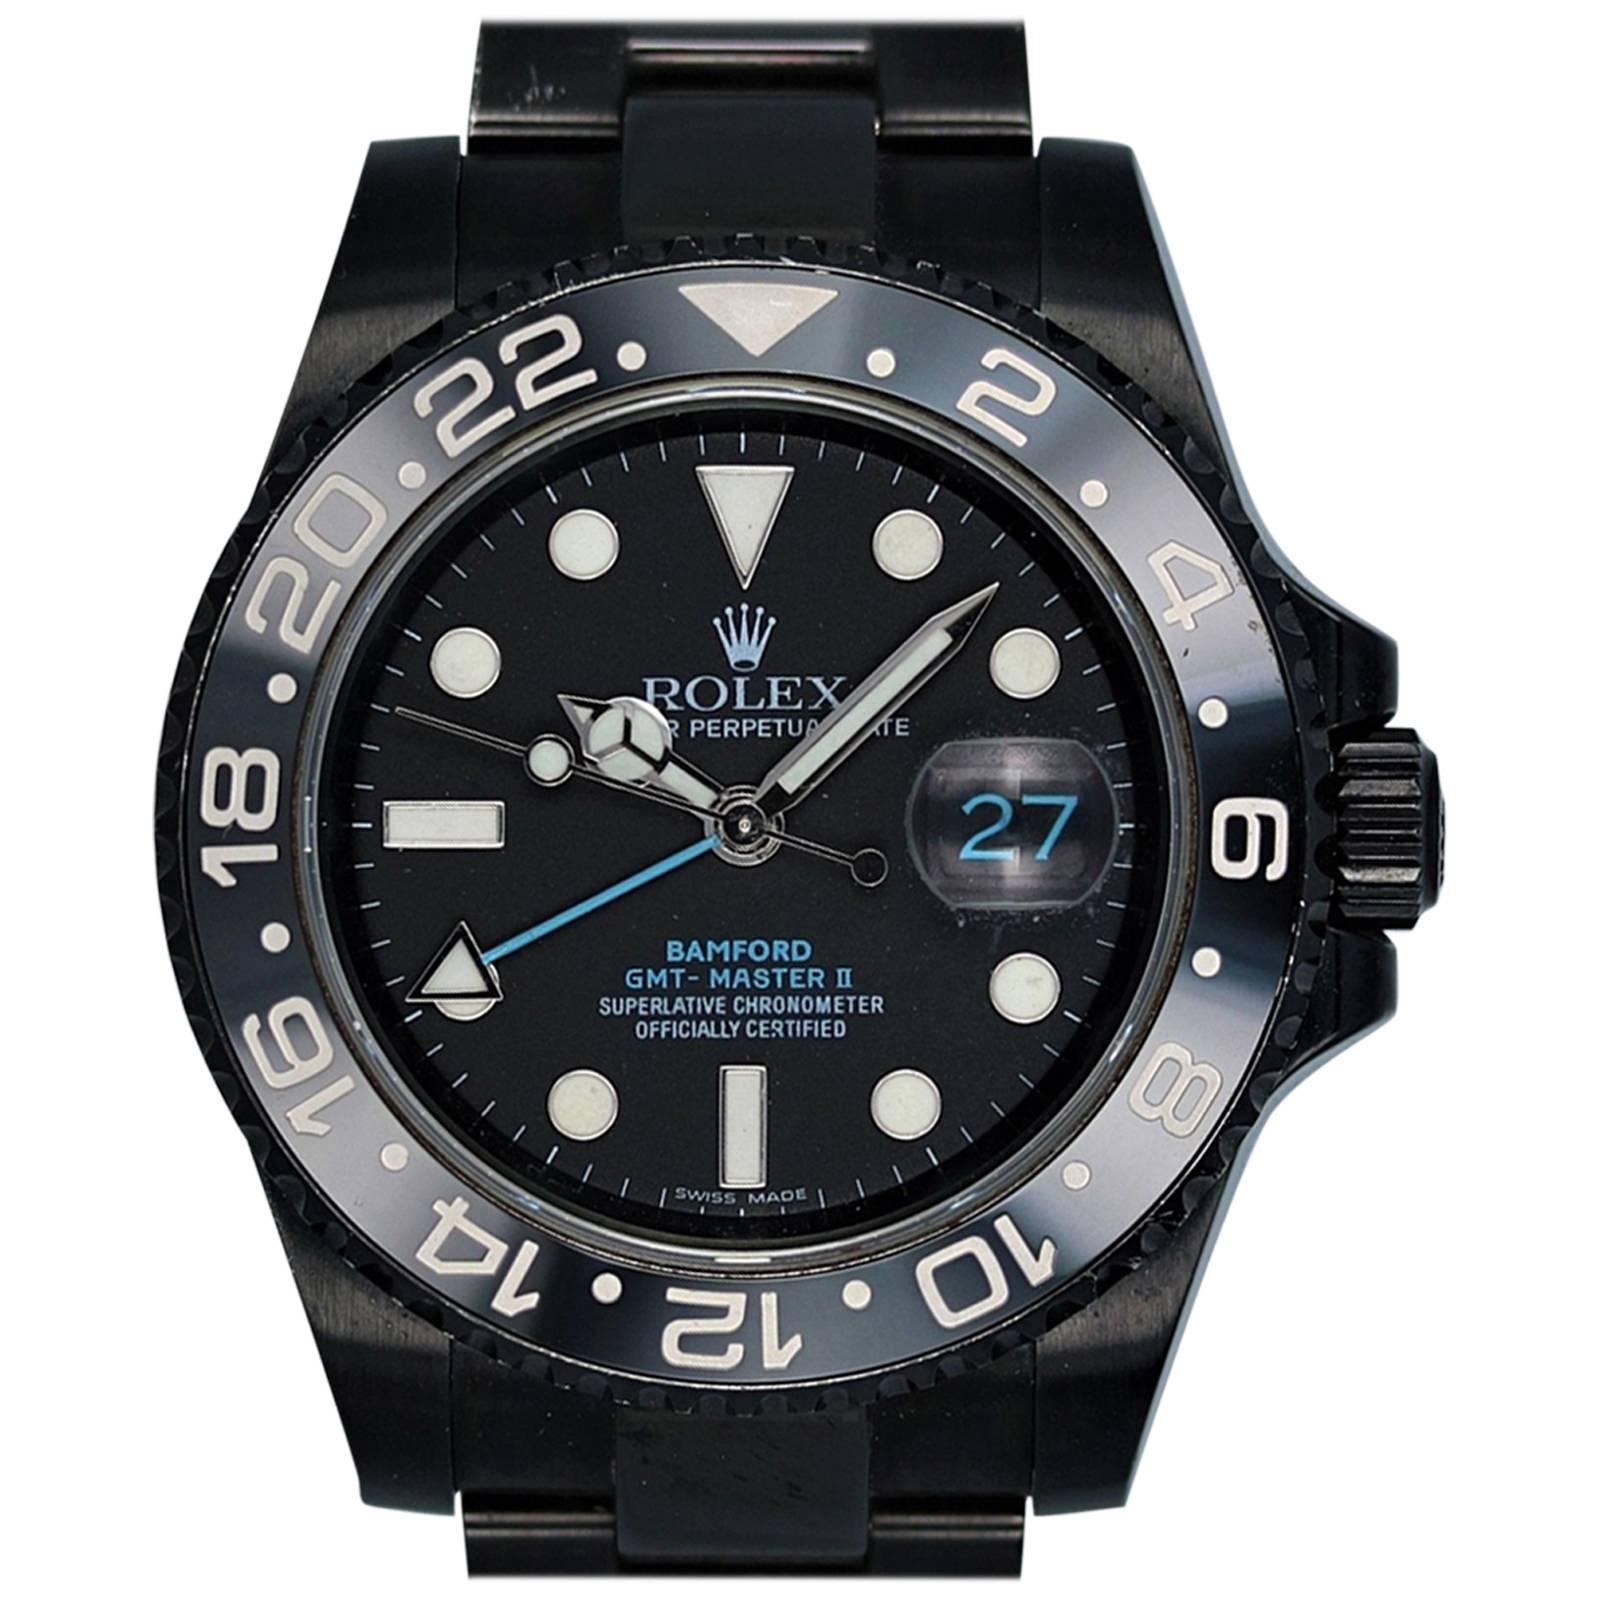 Blacked Out Bamford Rolex - Sonar Stealth 1 of only 8